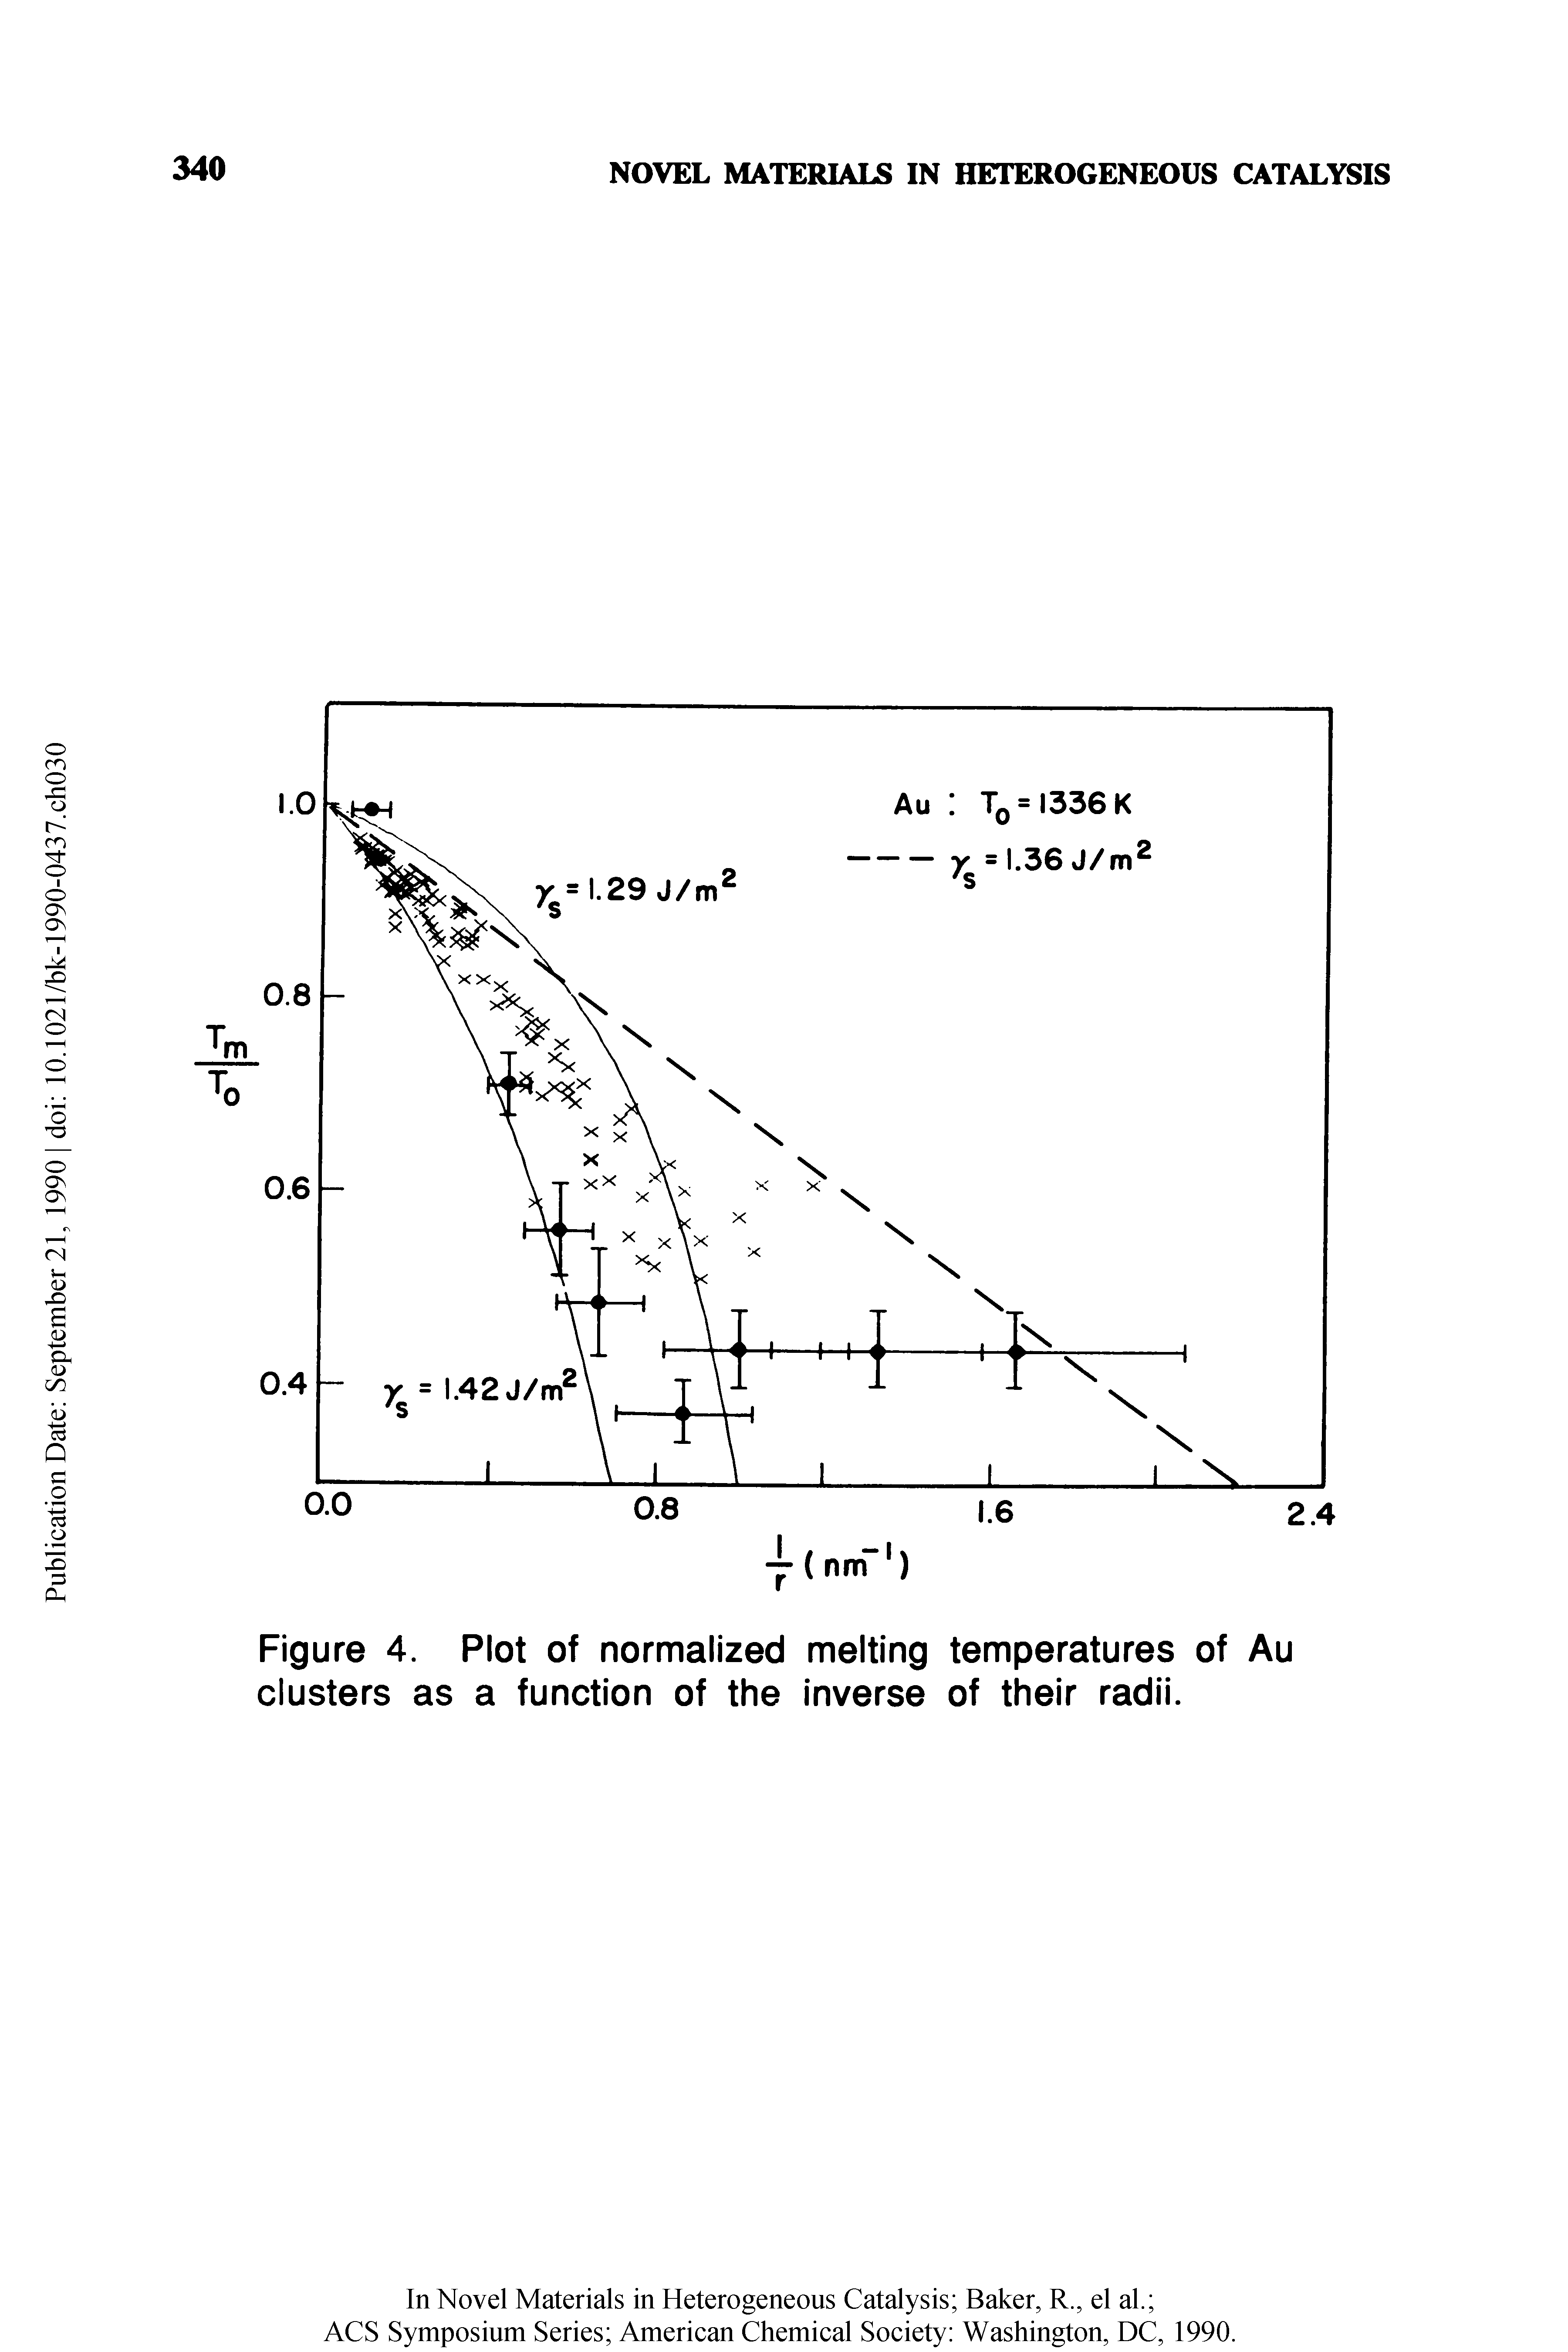 Figure 4. Plot of normalized melting temperatures of Au clusters as a function of the inverse of their radii.